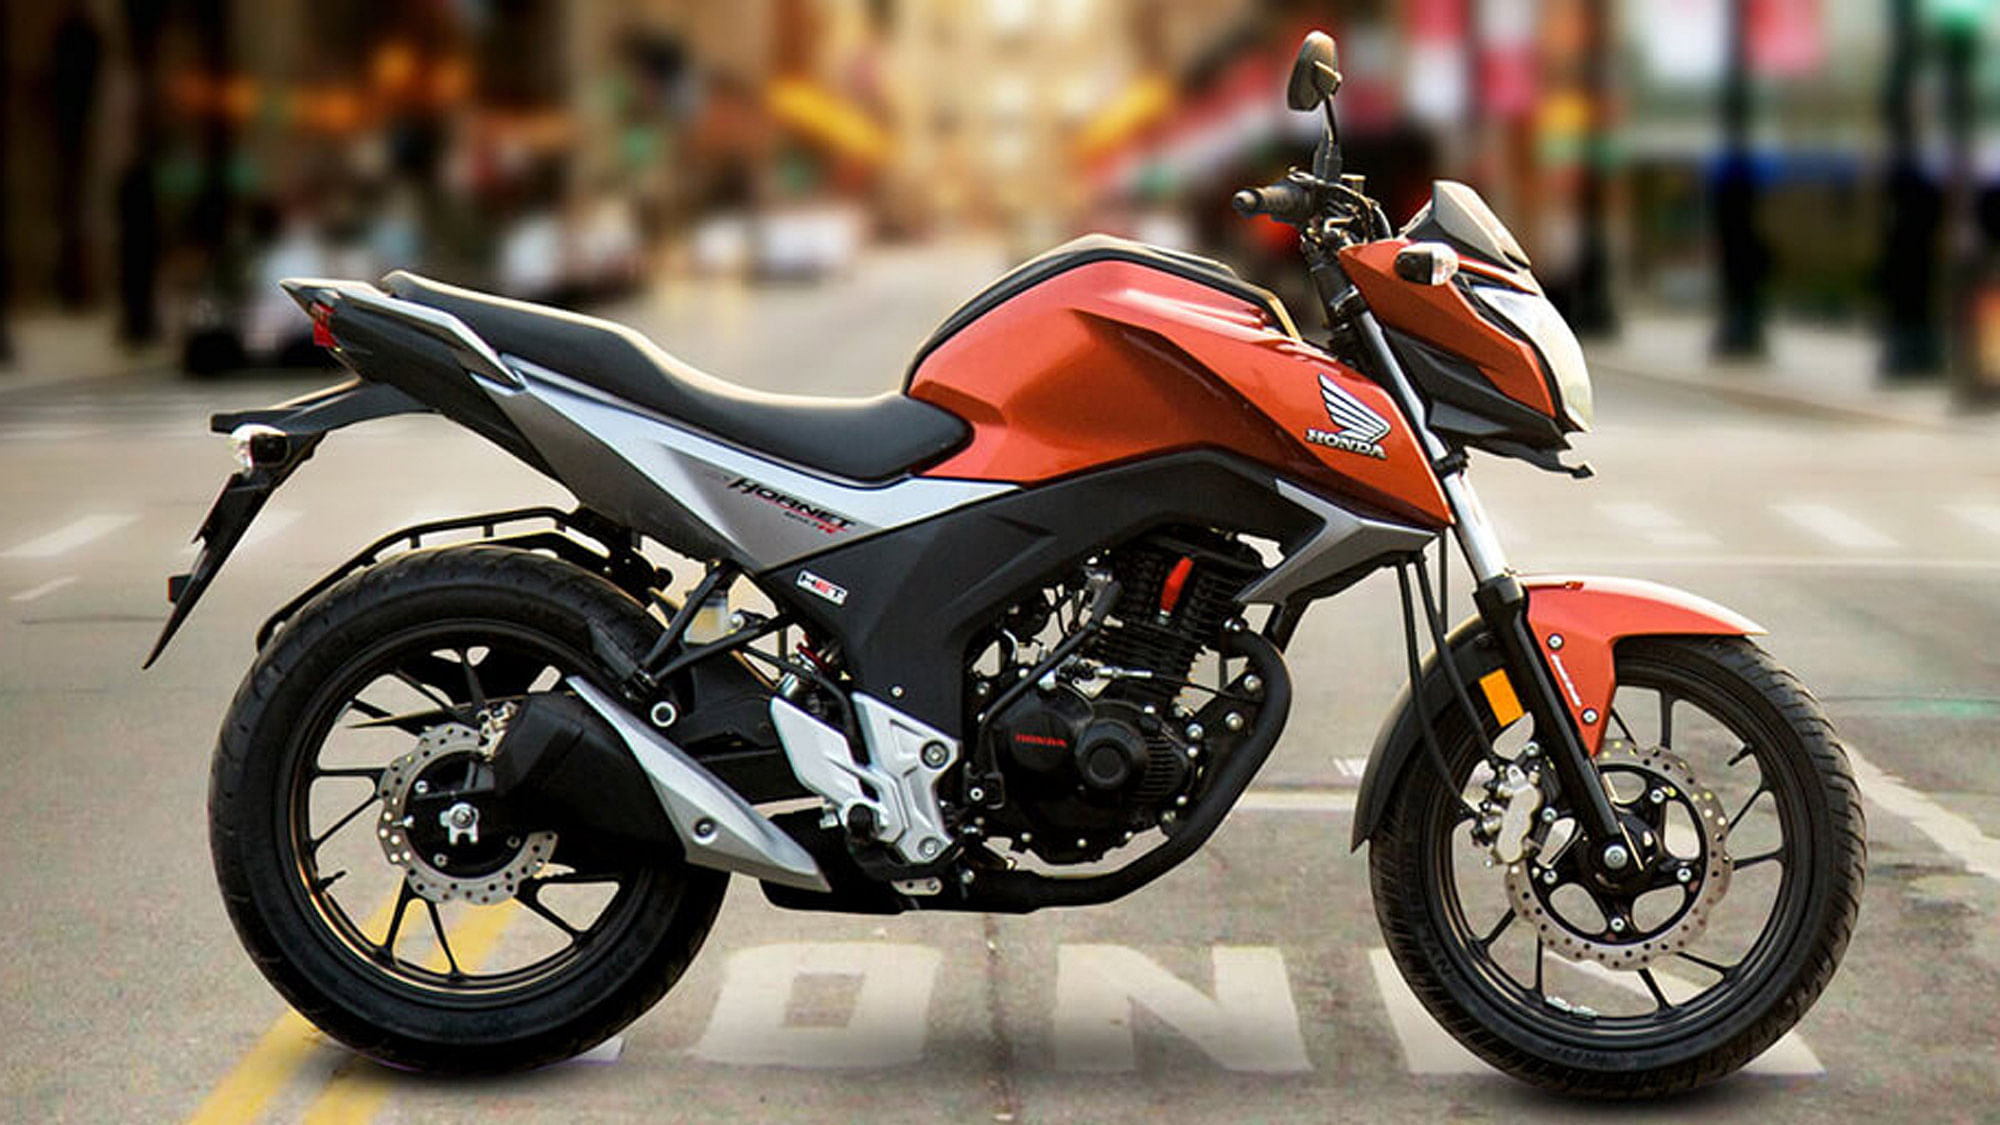 Honda Cb Hornet 160r Launched In India At Rs 79 900